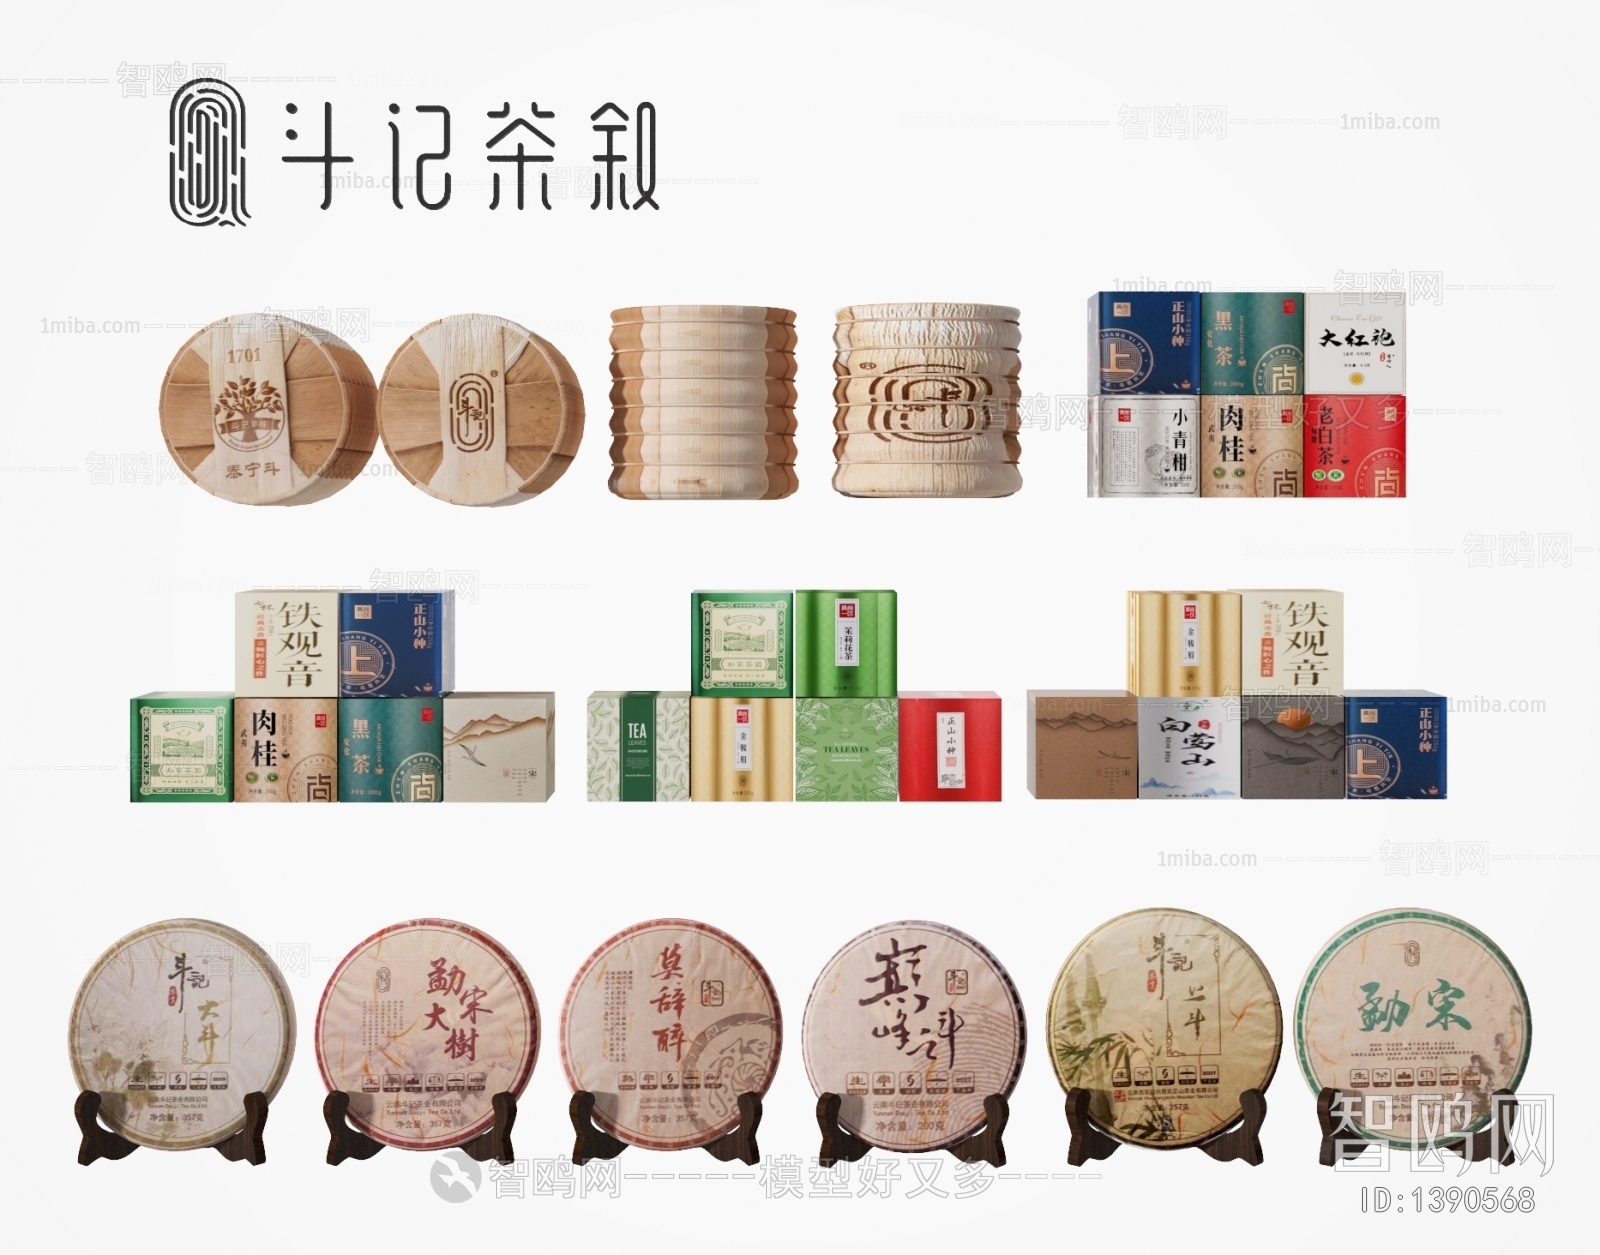 New Chinese Style Cigarette Tea